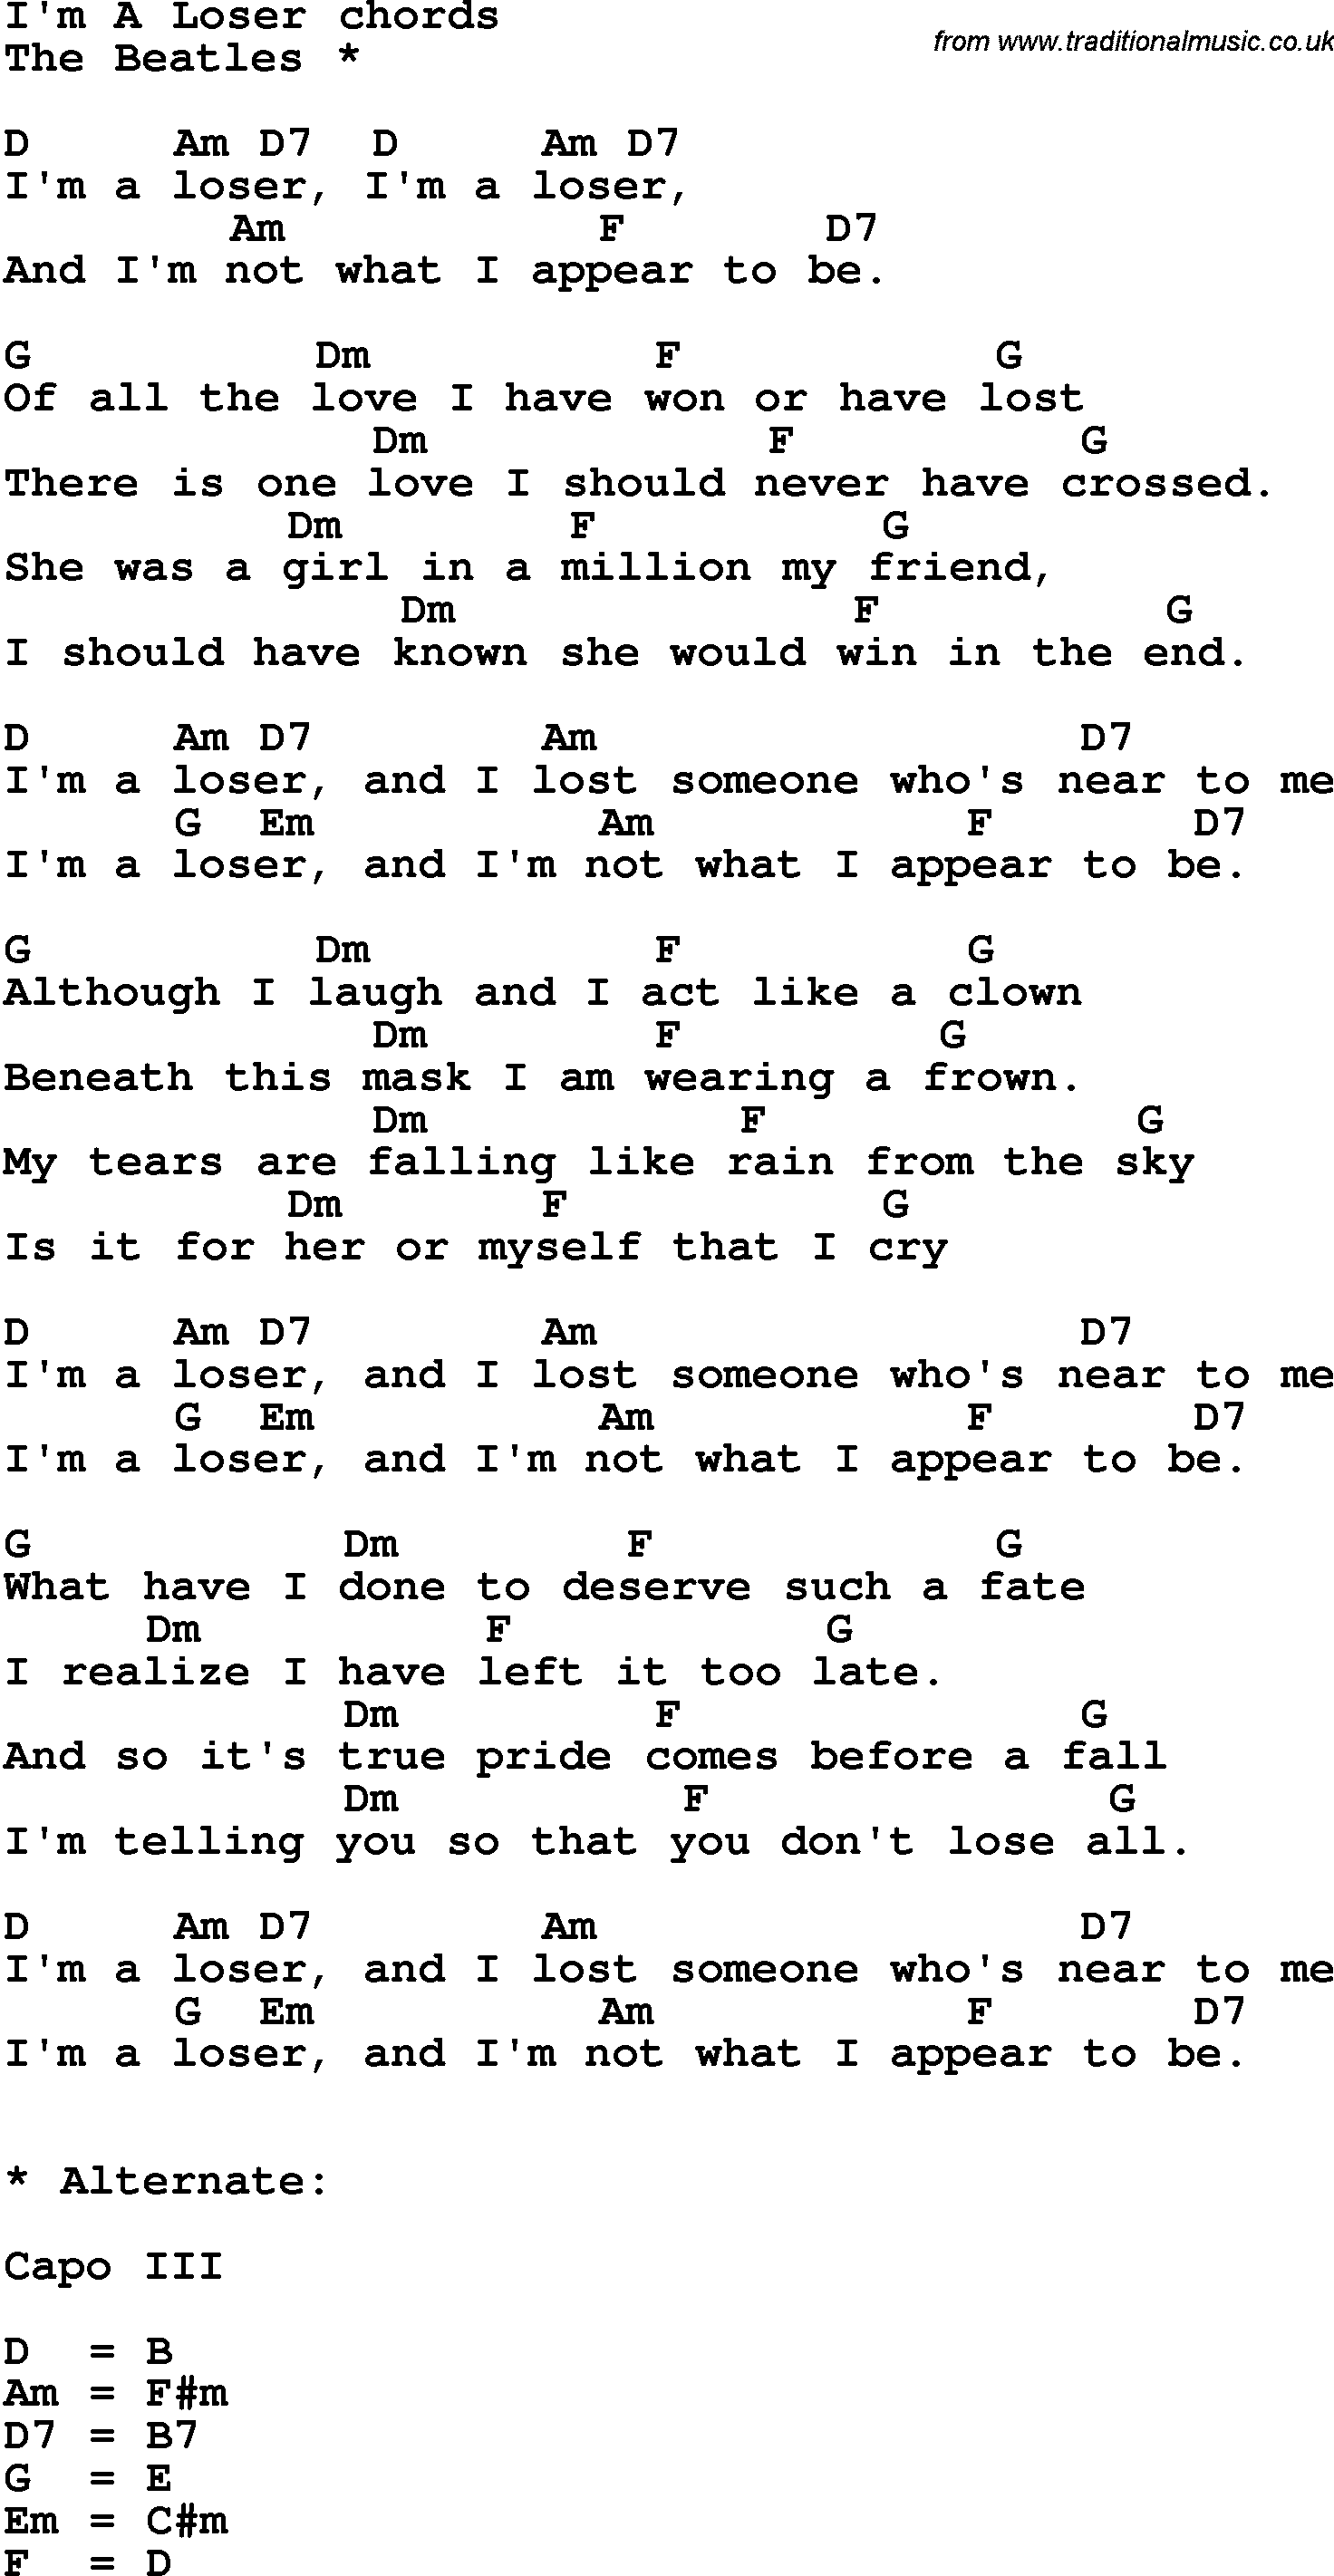 Song Lyrics with guitar chords for I'm A Loser - The Beatles